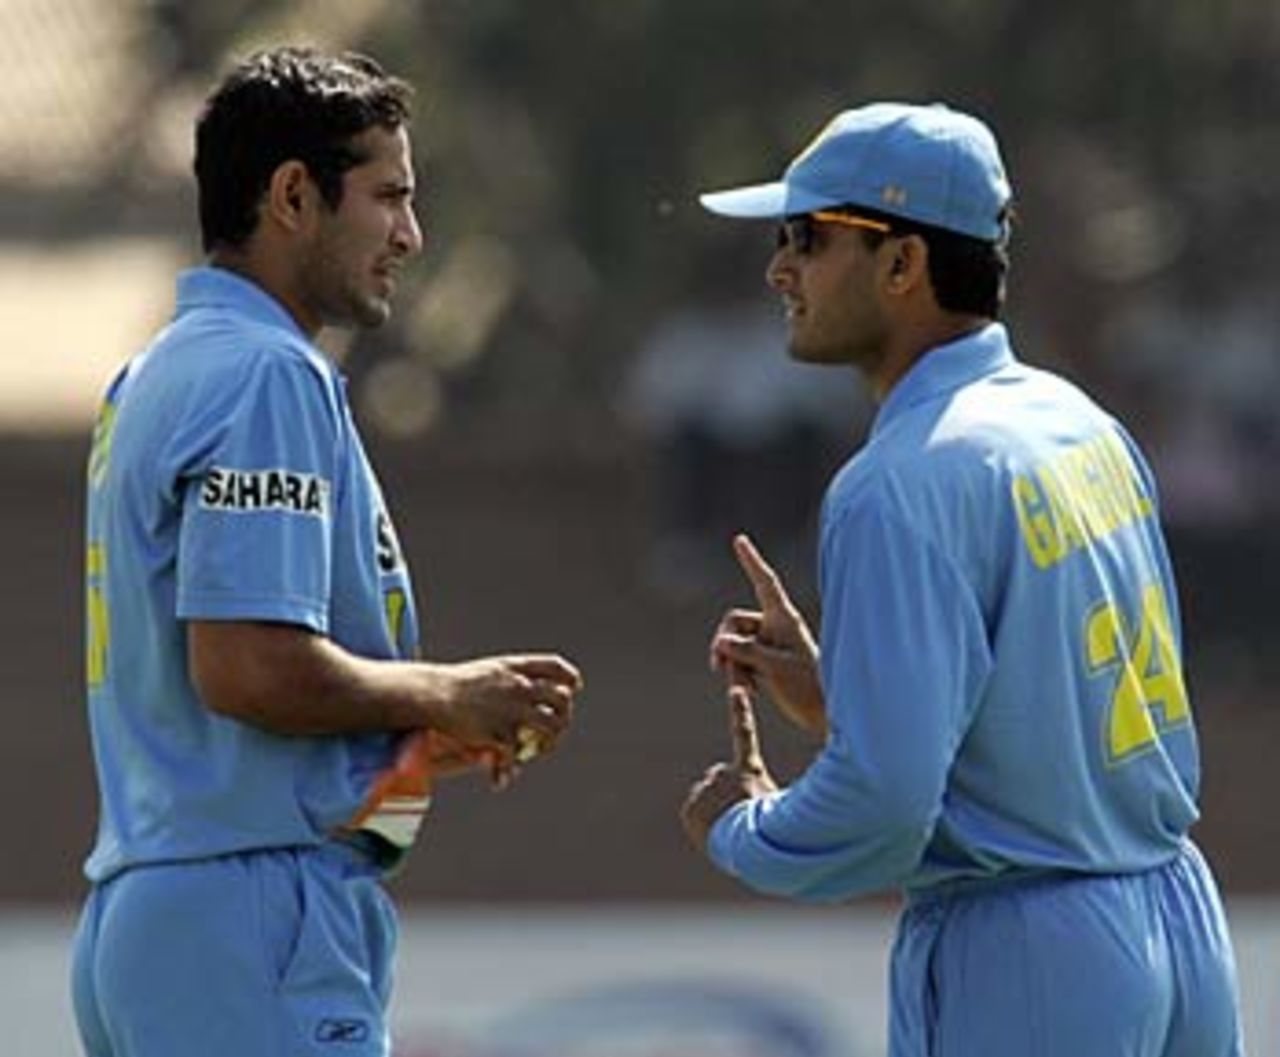 Sourav Ganguly explains tactics to Irfan Pathan, India v New Zealand, Videocon Cup, Bulawayo, August 26, 2005